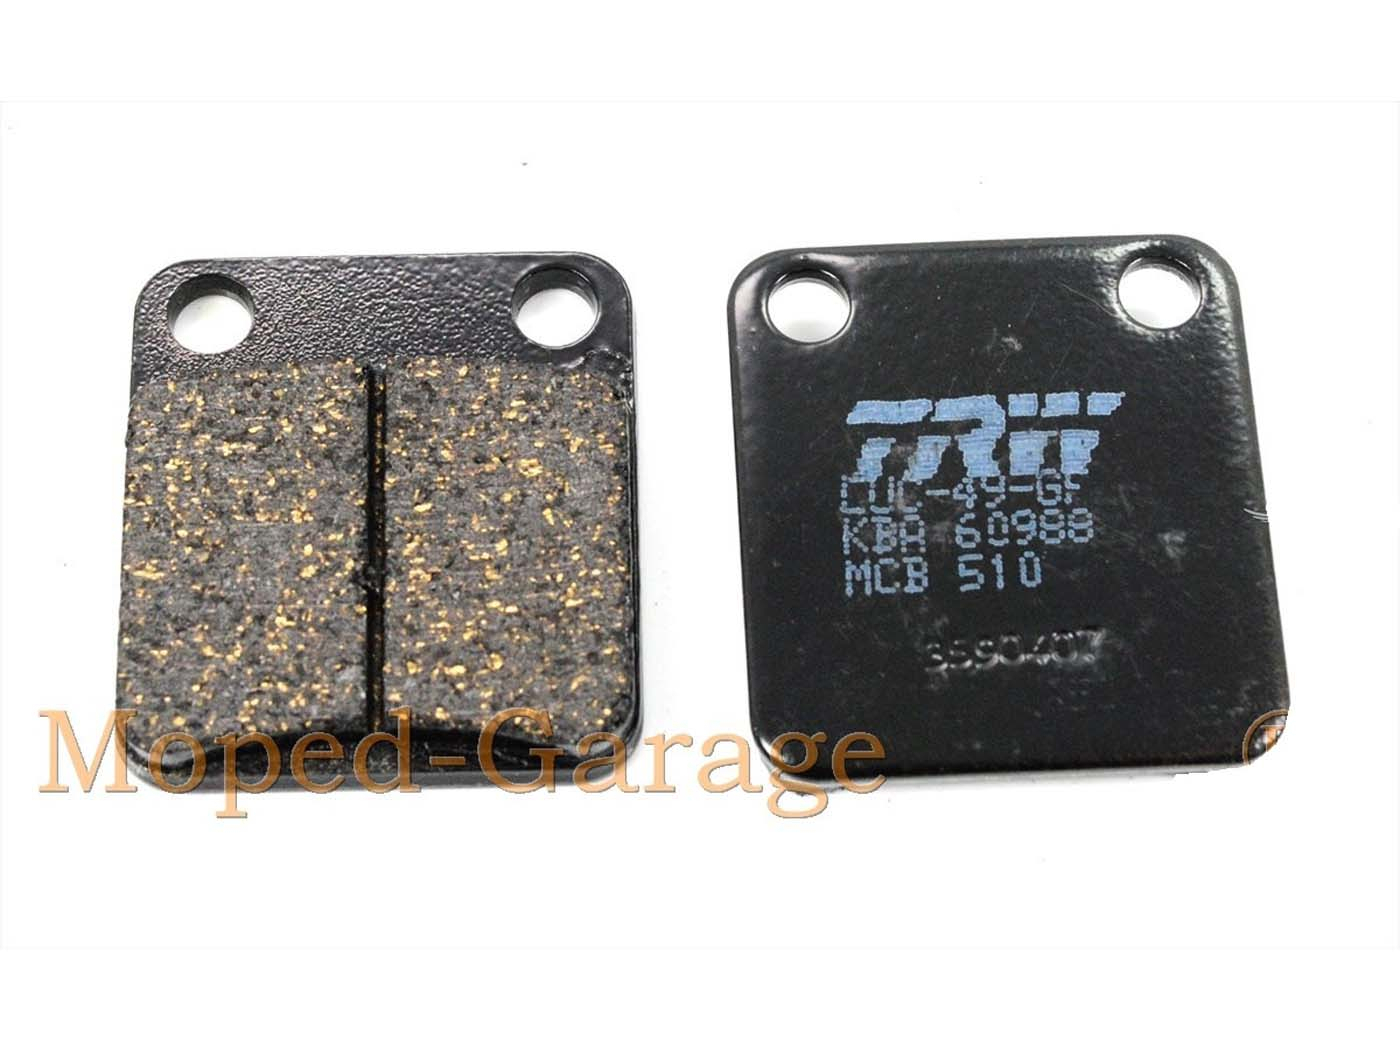 Brake Pads For Honda MB 50 S, MBX 80 Type SW2, SWD